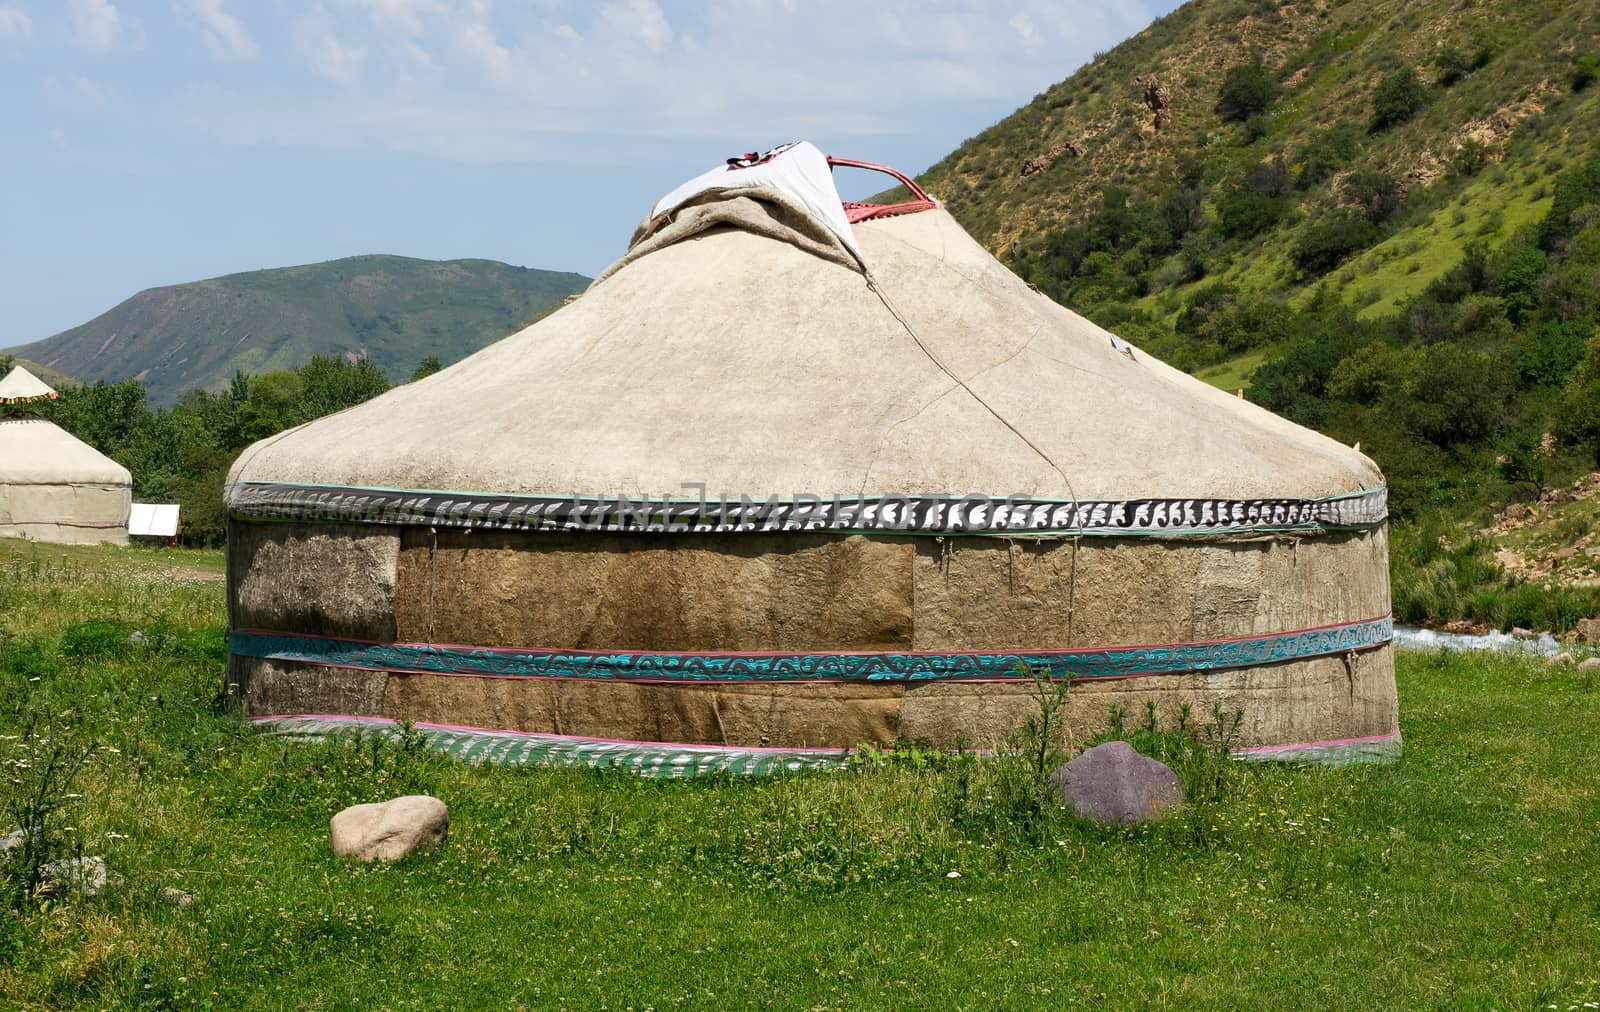 Traditional Ger (yurt) tent in Kazakh mountains.